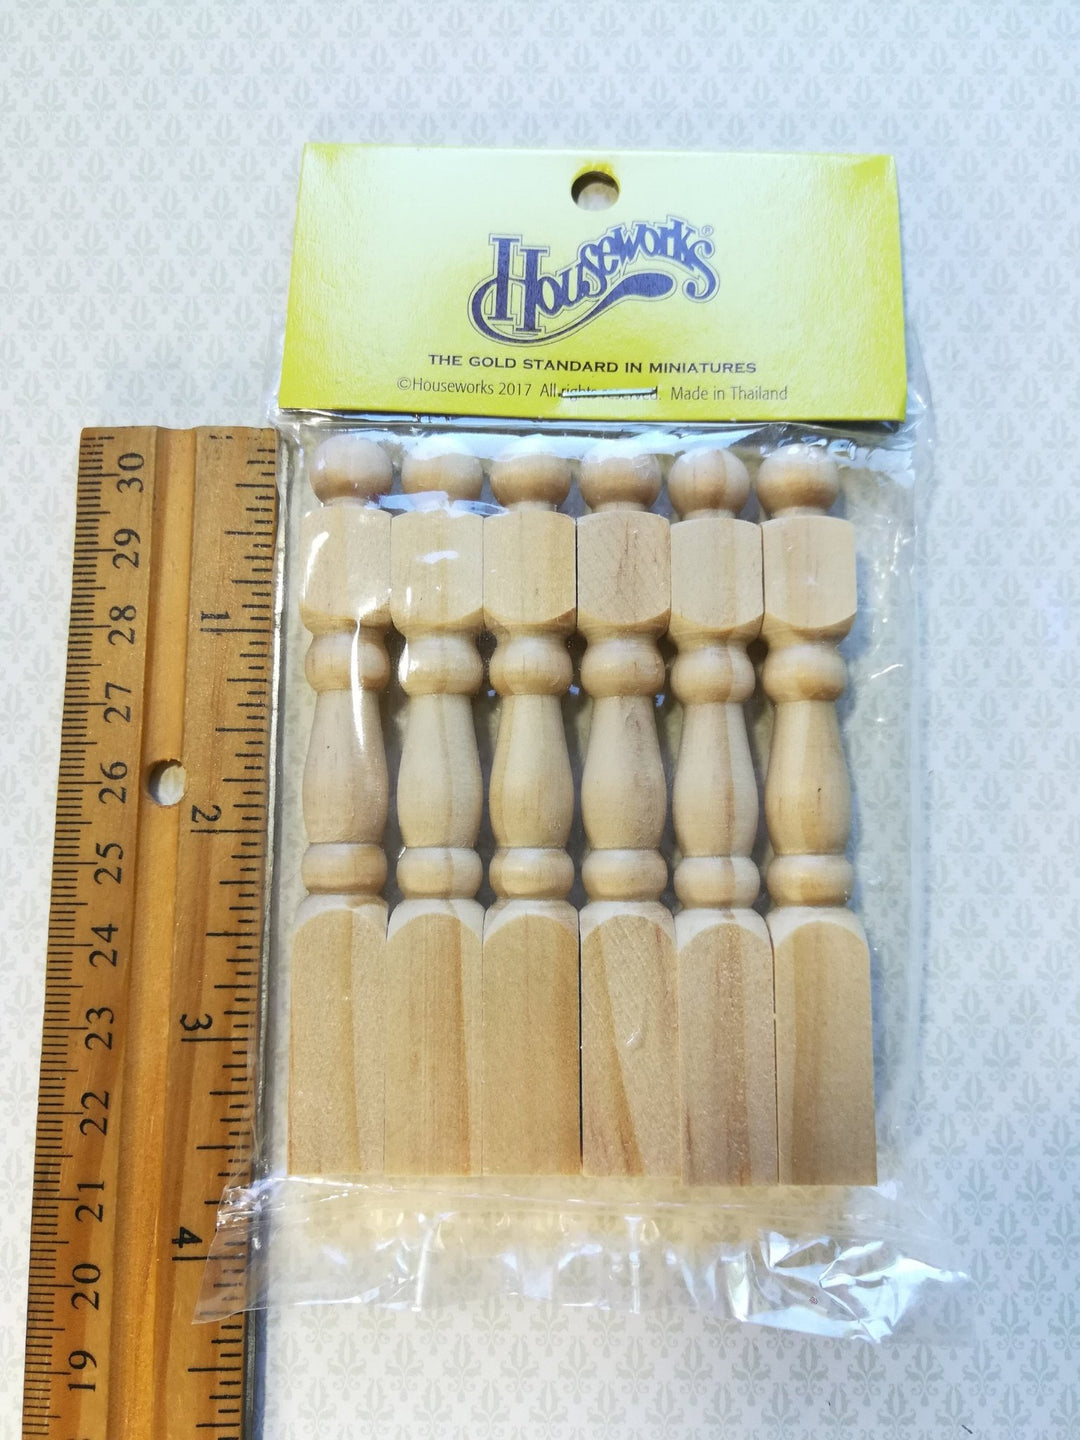 Dollhouse Miniature Newel Posts Large 1:12 Scale for Stairs 3 1/2" Tall spindles - Miniature Crush